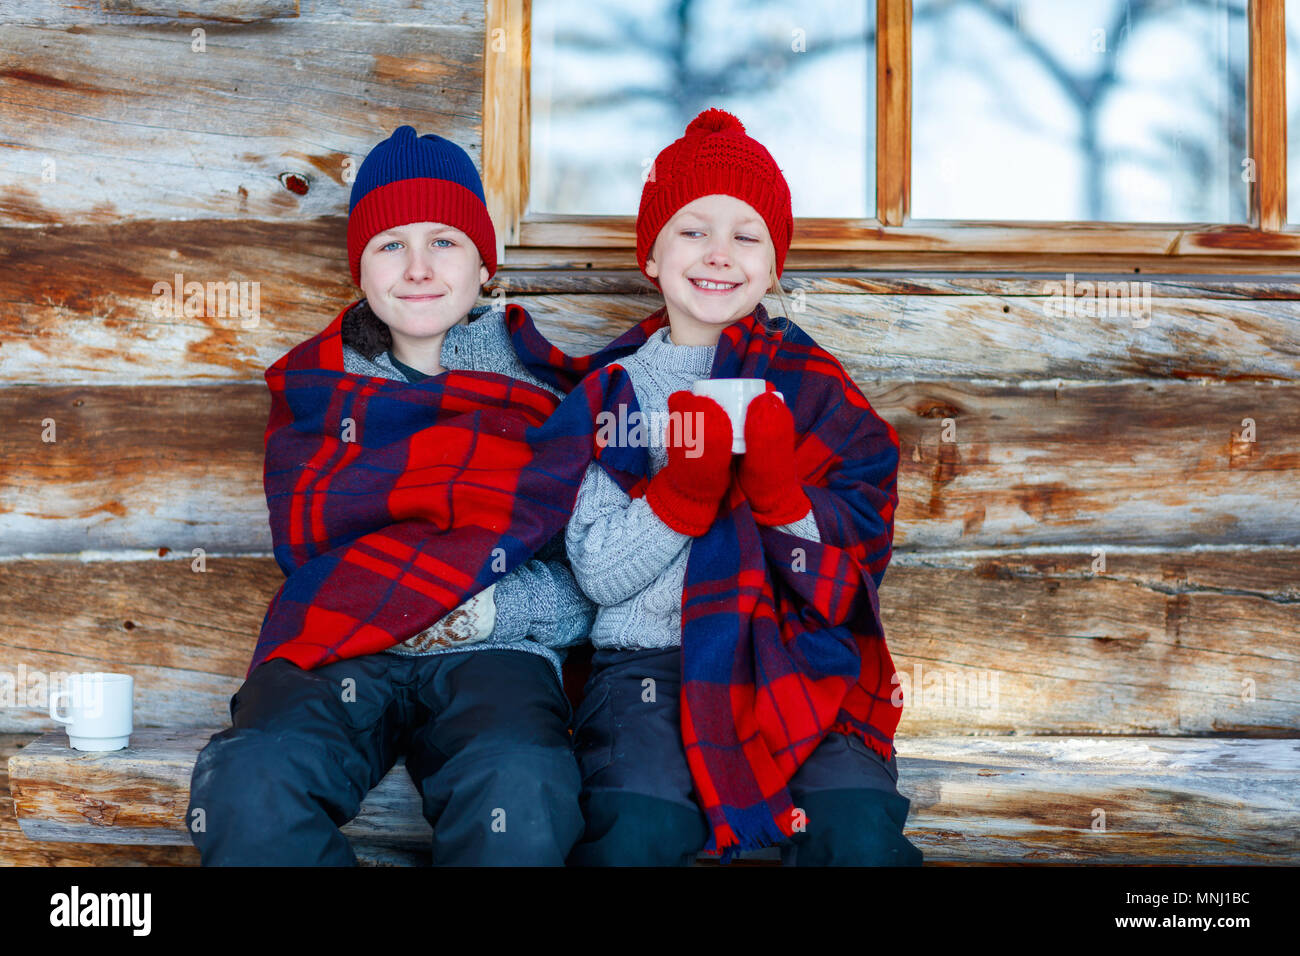 Kids outdoors on beautiful winter day drinking hot chocolate in front of log cabin vacation house Stock Photo